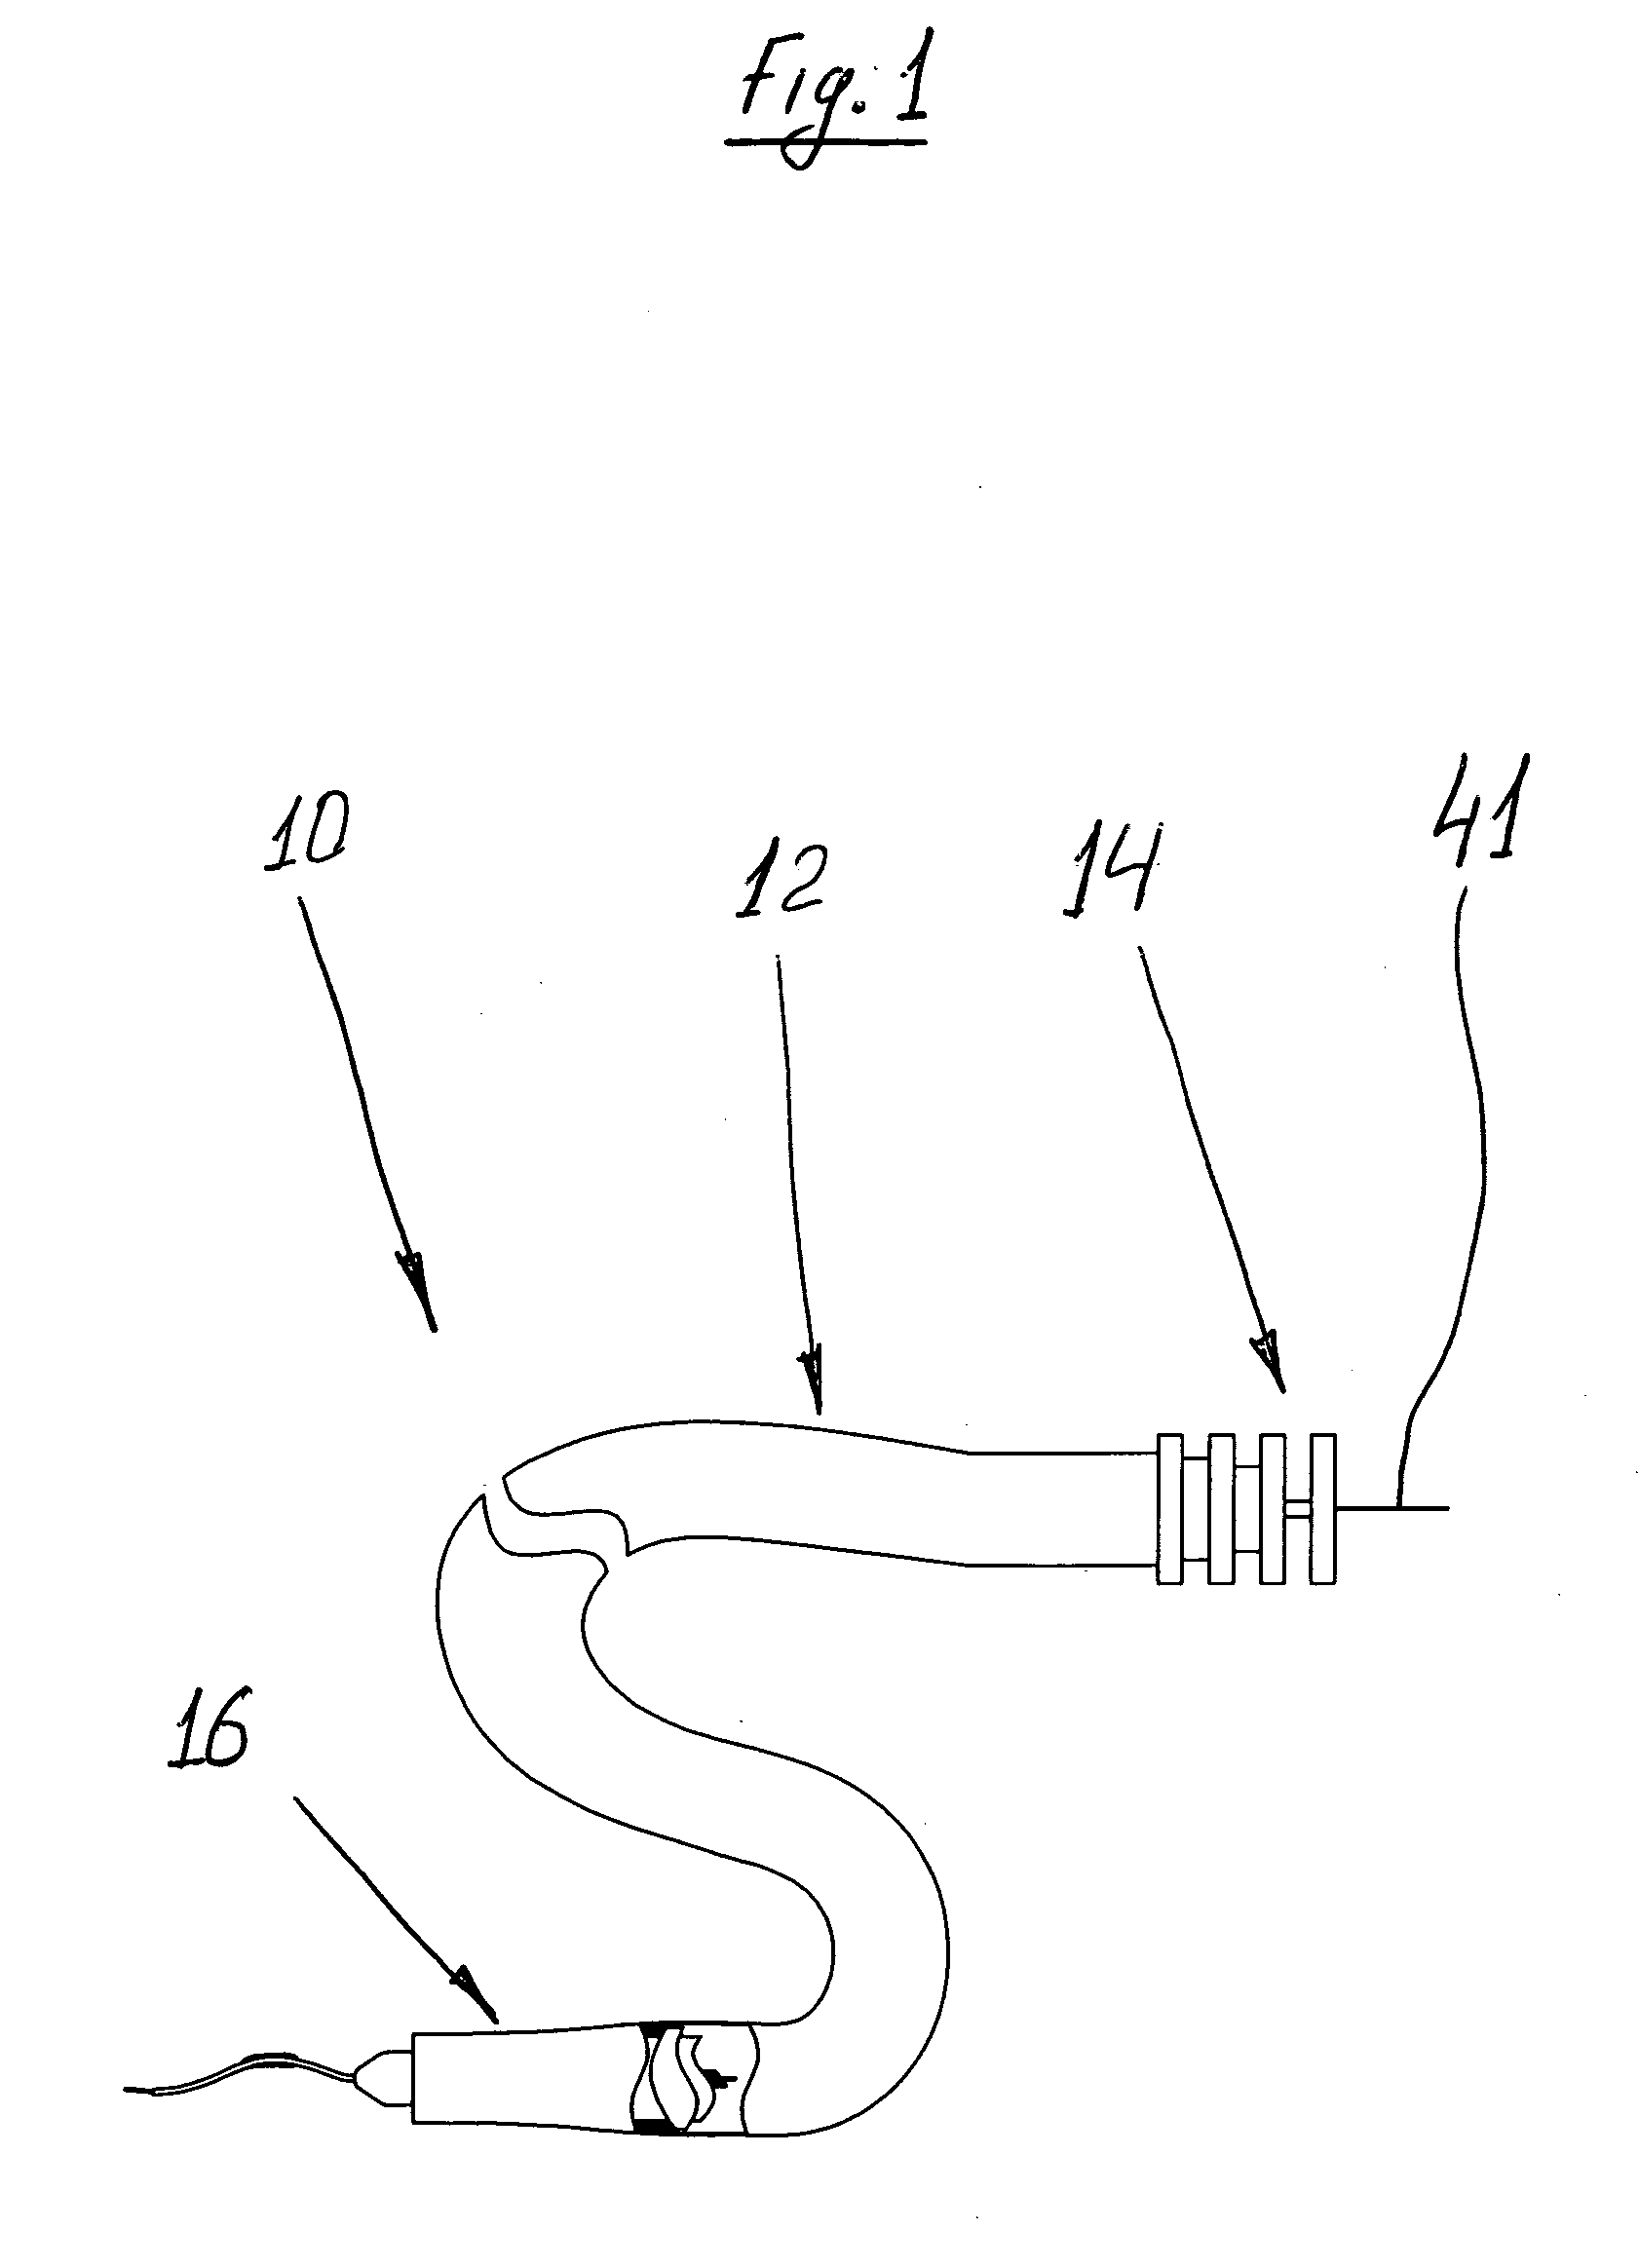 Thrombectomy catheter with a helical cutter